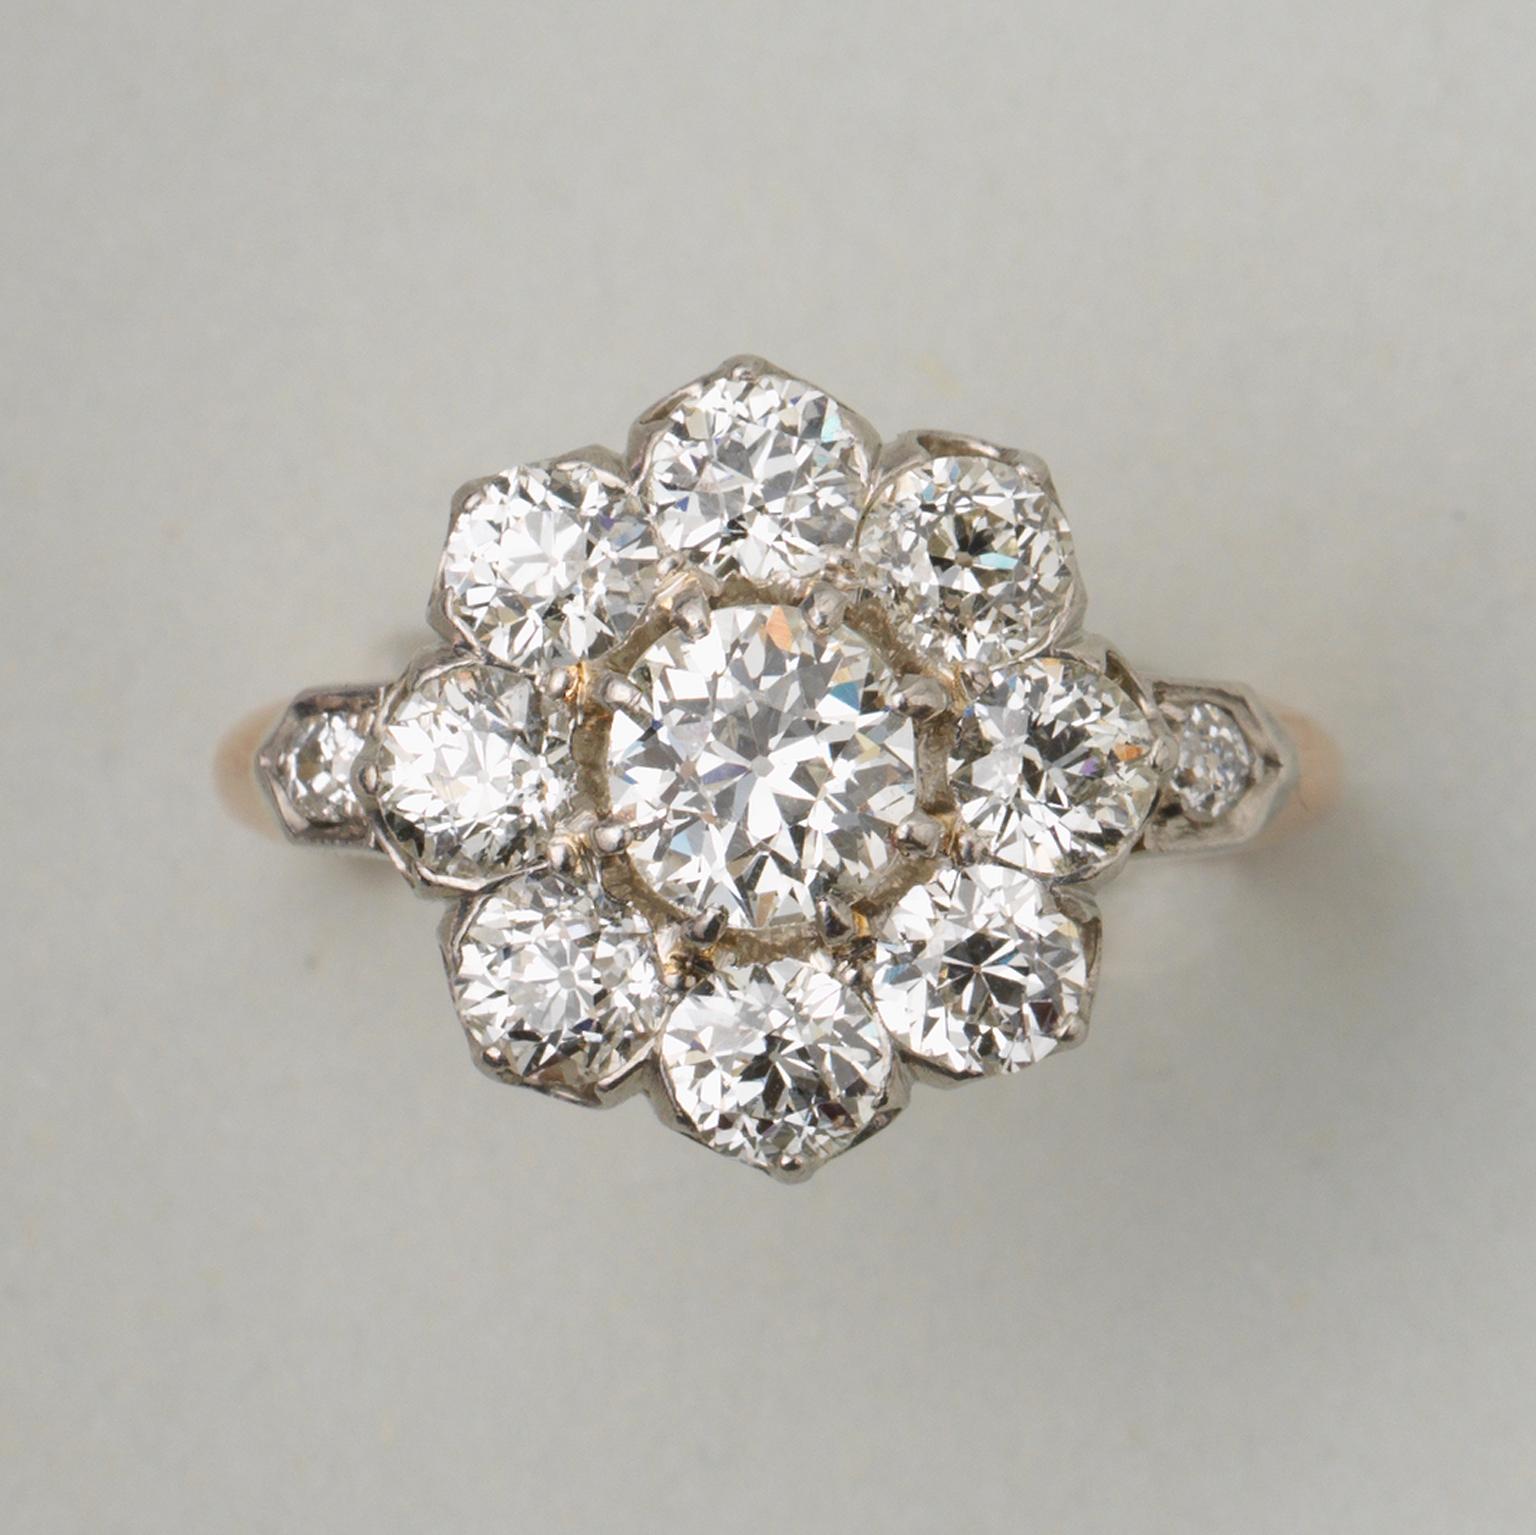 An 18-carat gold and platinum cluster ring set with old-cut diamonds (app. 2.75 carats, I-J, VVS). France, circa 1910.

Weight: 7.27 grams
Ring size: 18.5 mm / 8.5 US